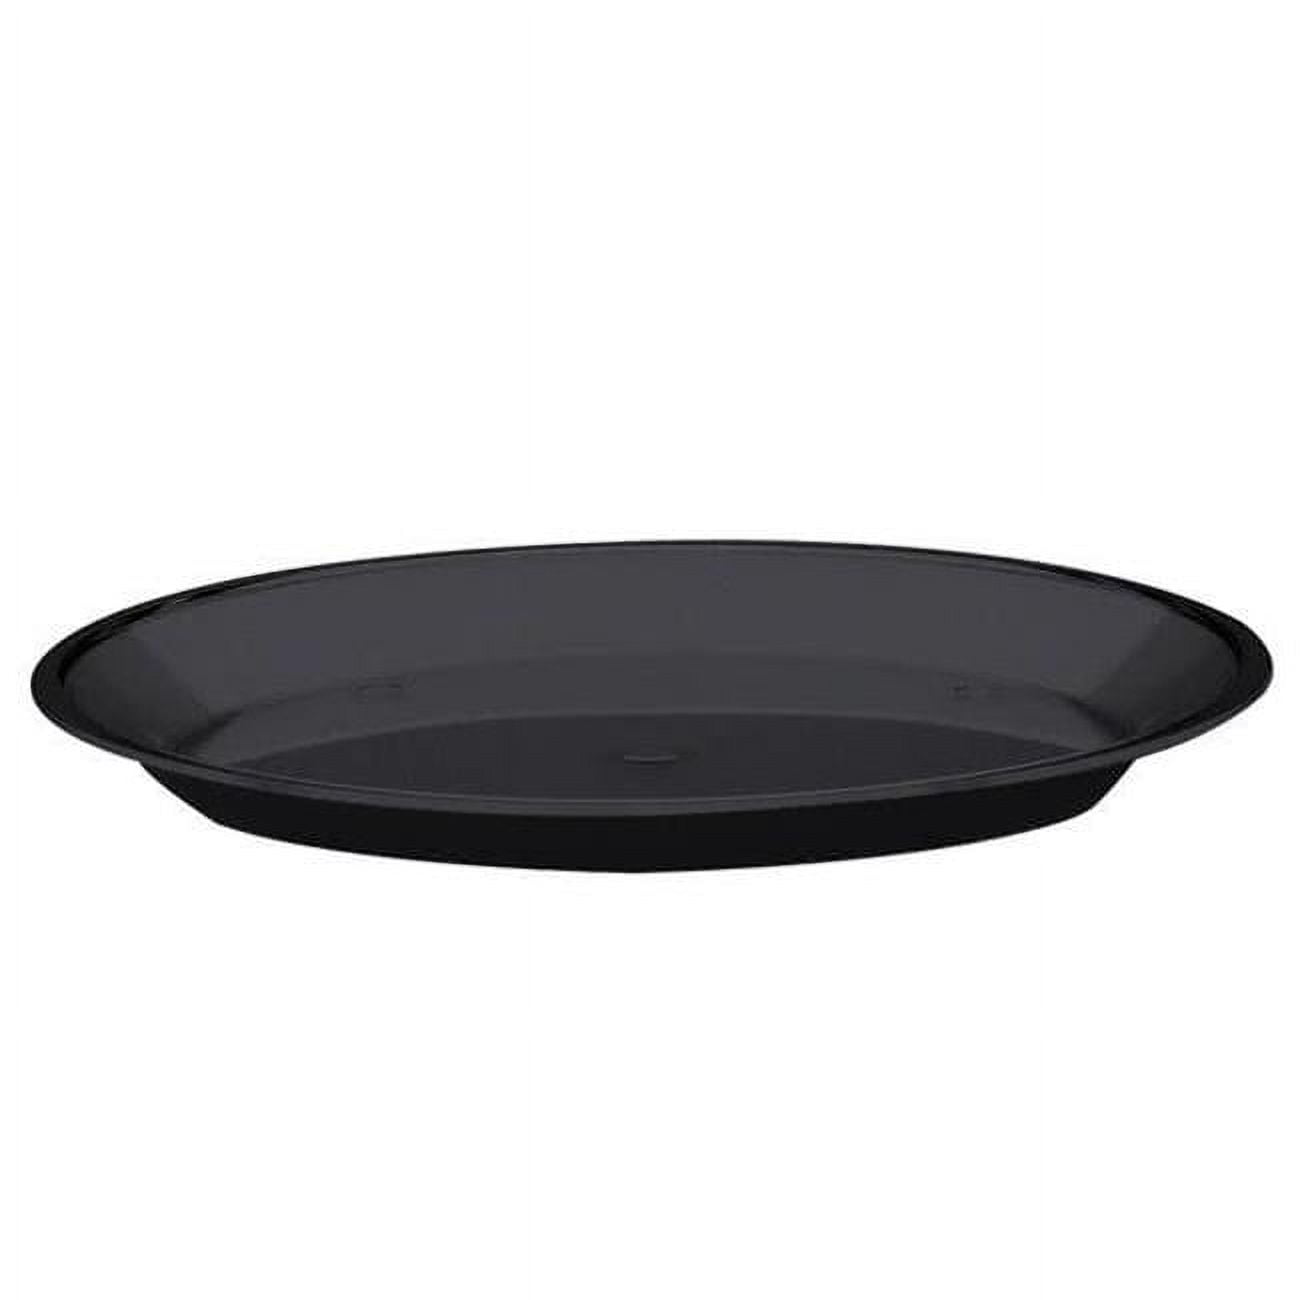 Picture of Cal Mil 315-15-13 15 in. Round Shallow Tray - Black